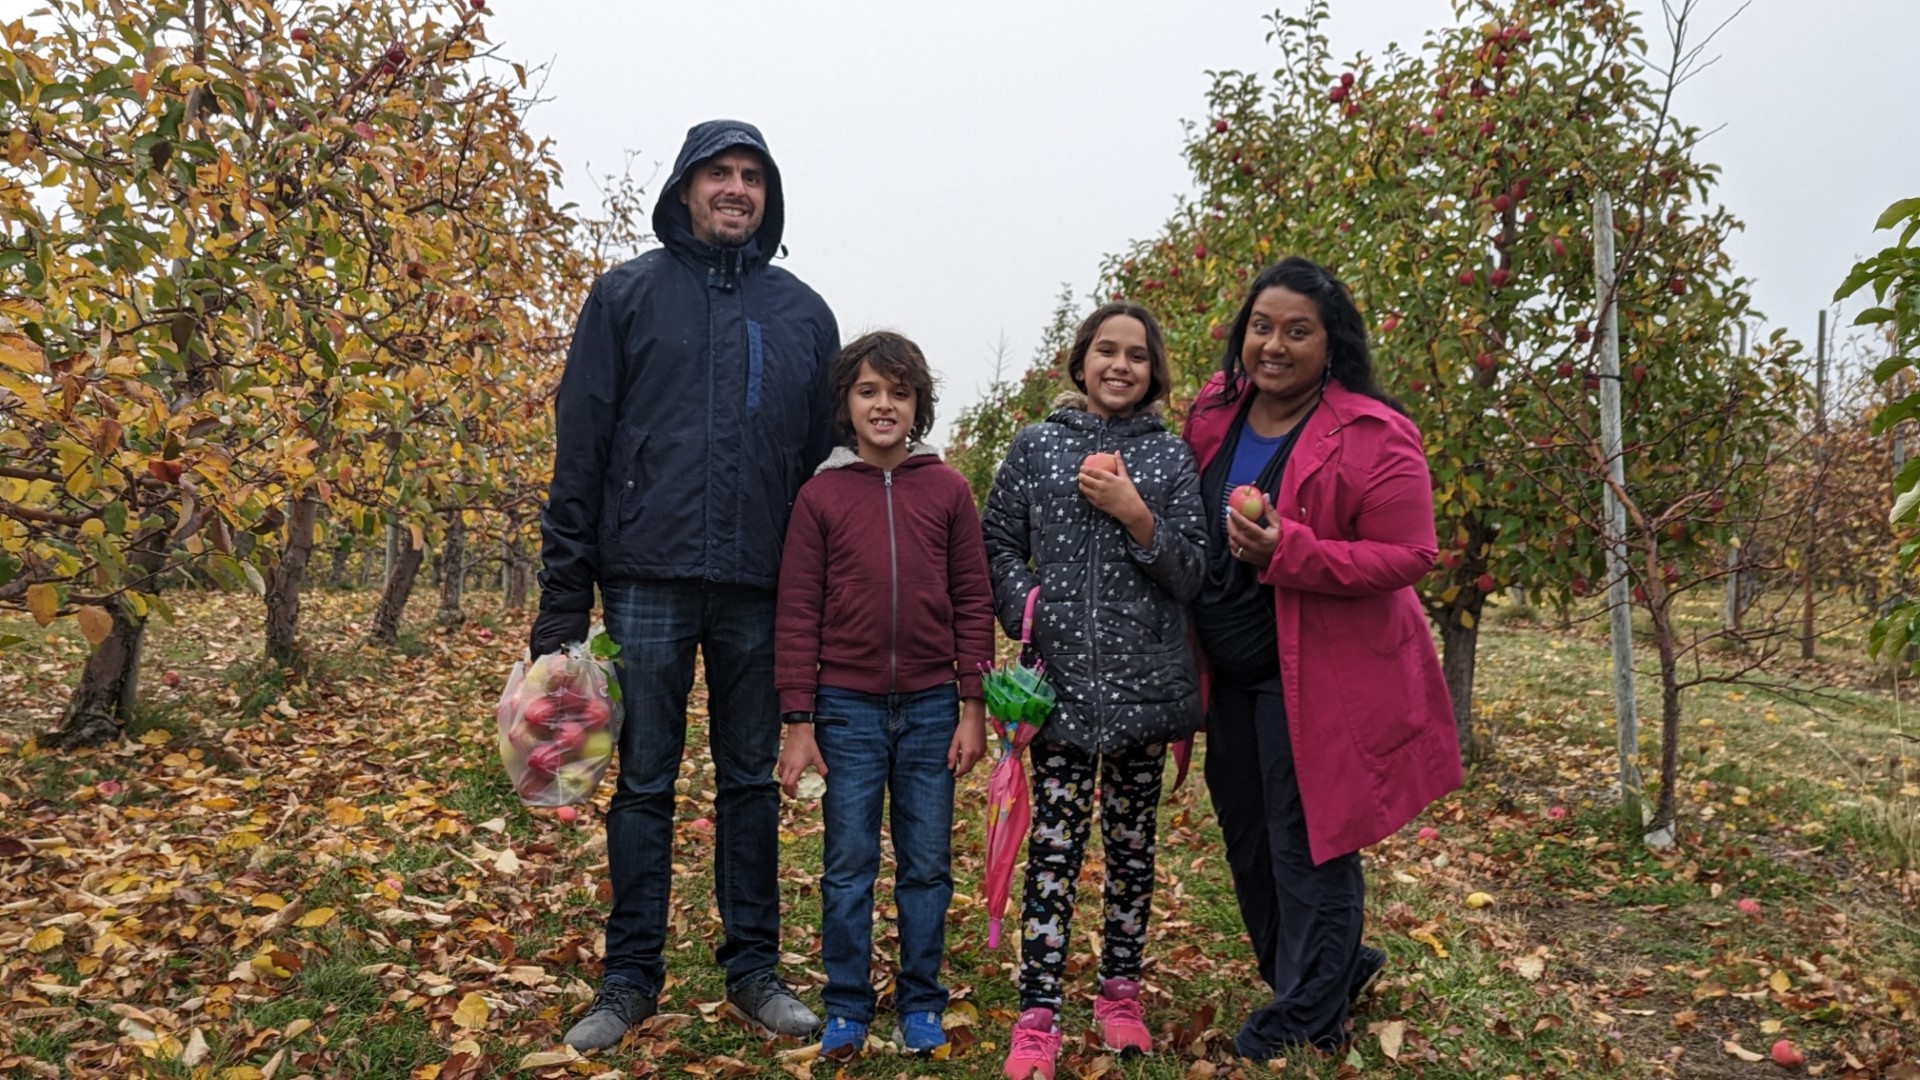 Murphy family standing in an Ontario apple orchard